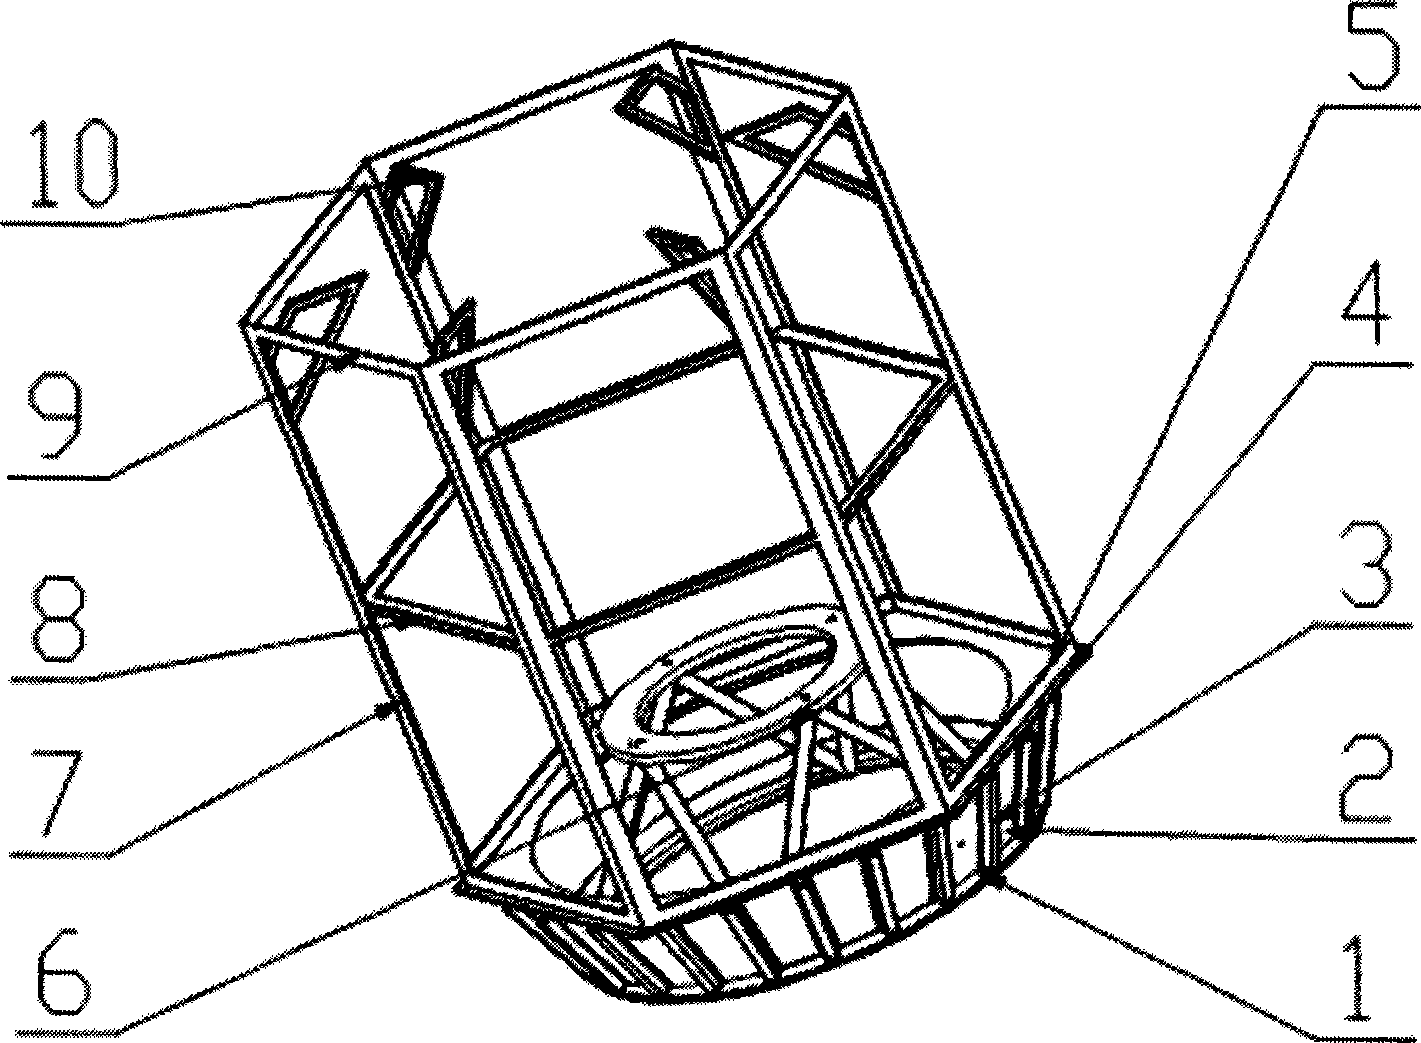 Main load-carrying structure of spacecraft